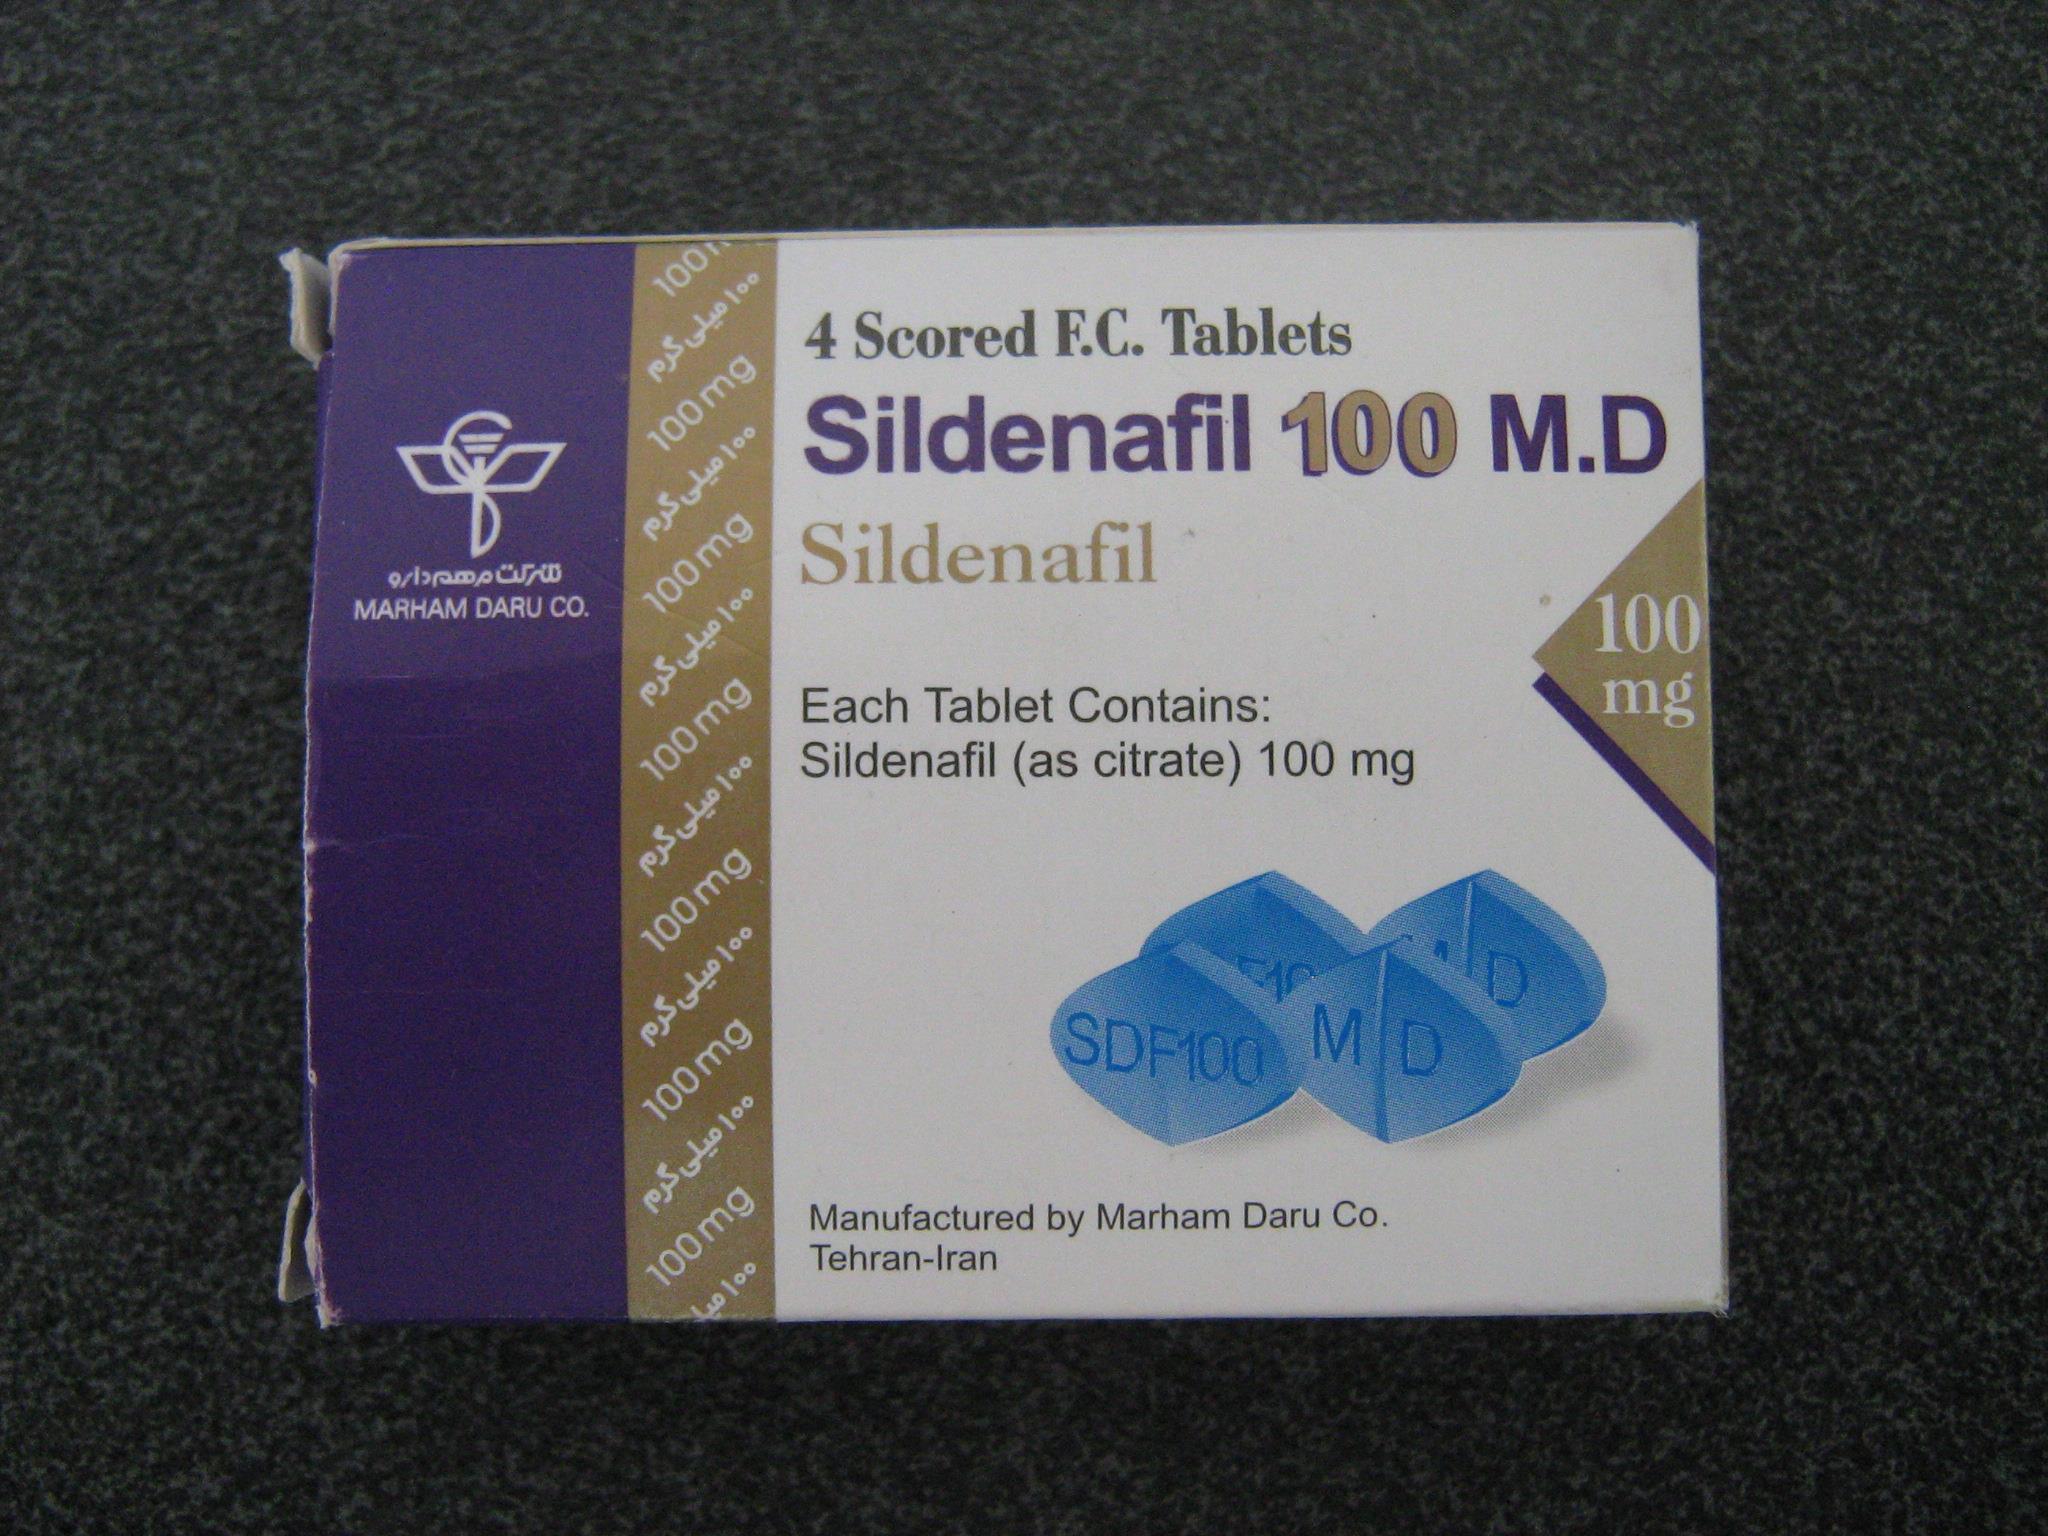 Image of the illigal product: Sildenafil 100 M.D.